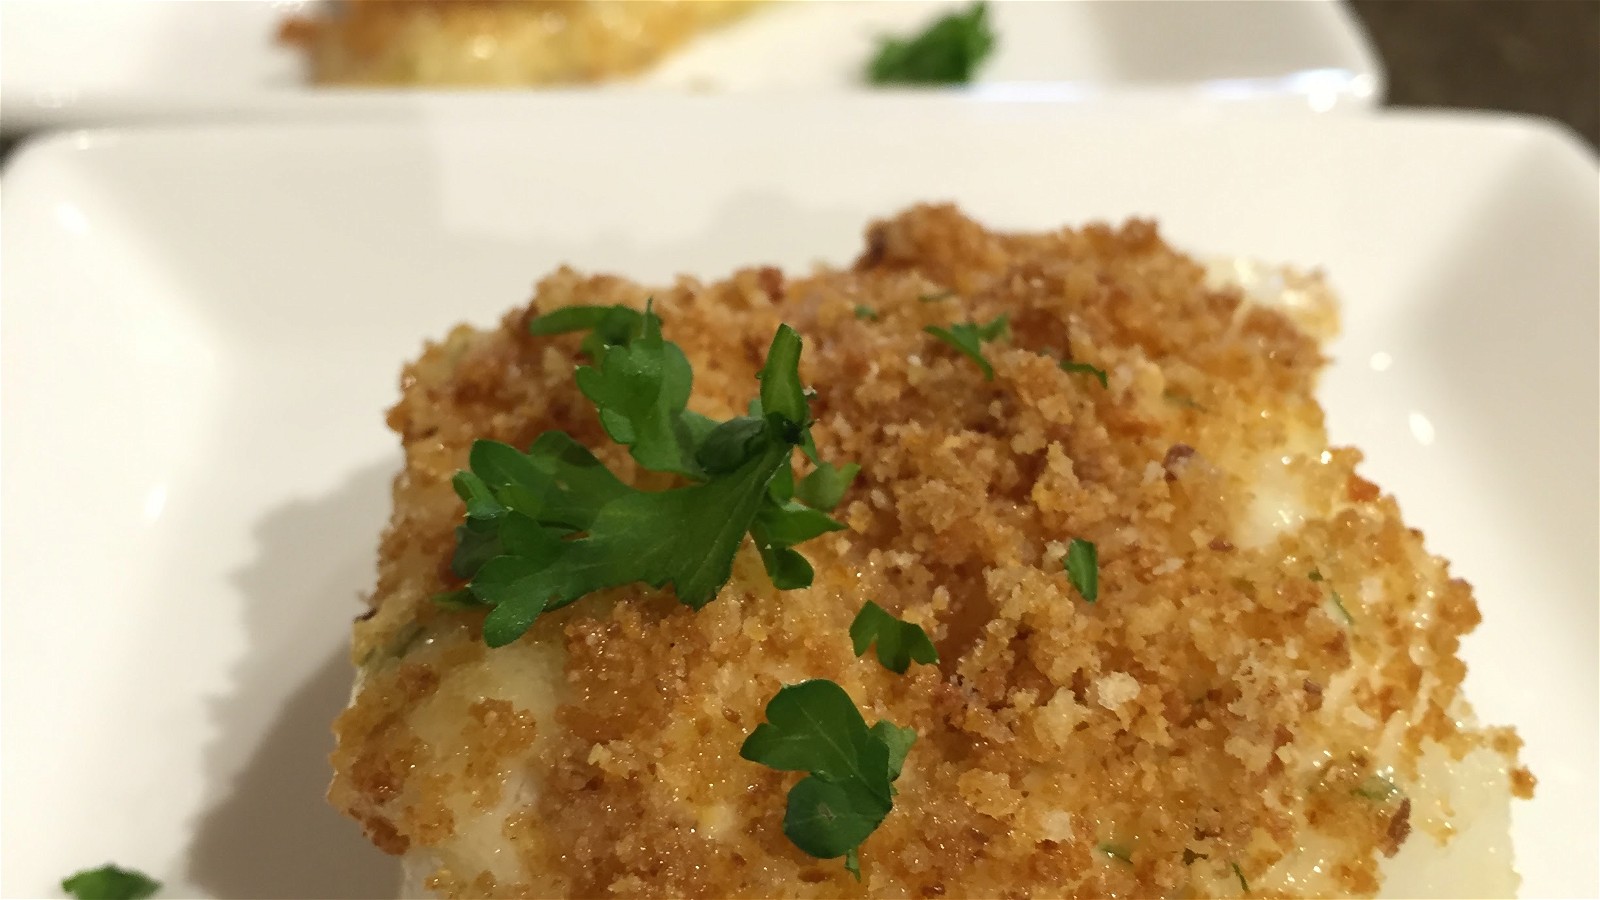 Image of Buttercrumb and Dill Baked Cod